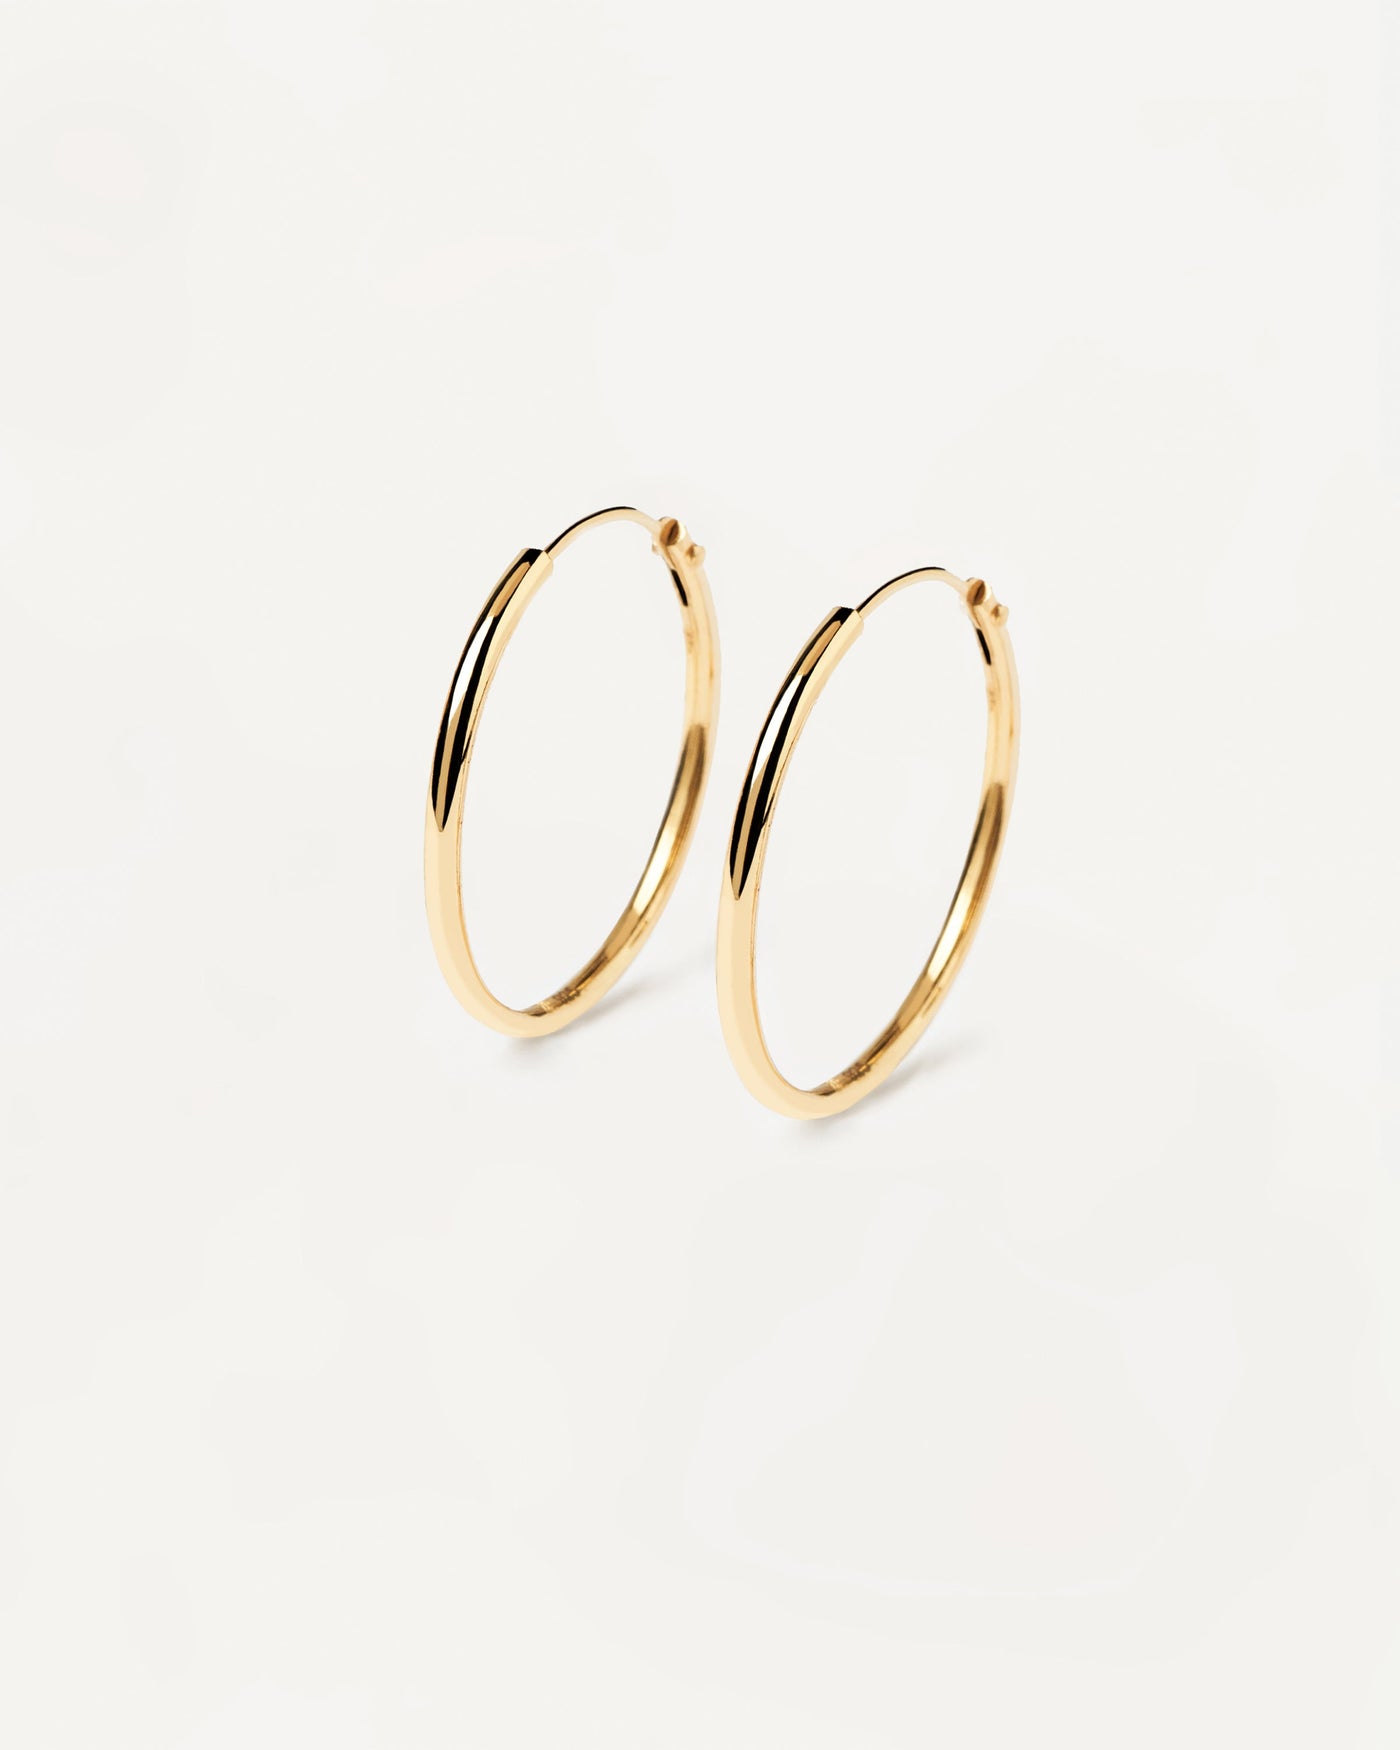 2023 Selection | Medium Hoops. Classic round endless hoop earrings in 18k gold plated silver. Get the latest arrival from PDPAOLA. Place your order safely and get this Best Seller. Free Shipping.